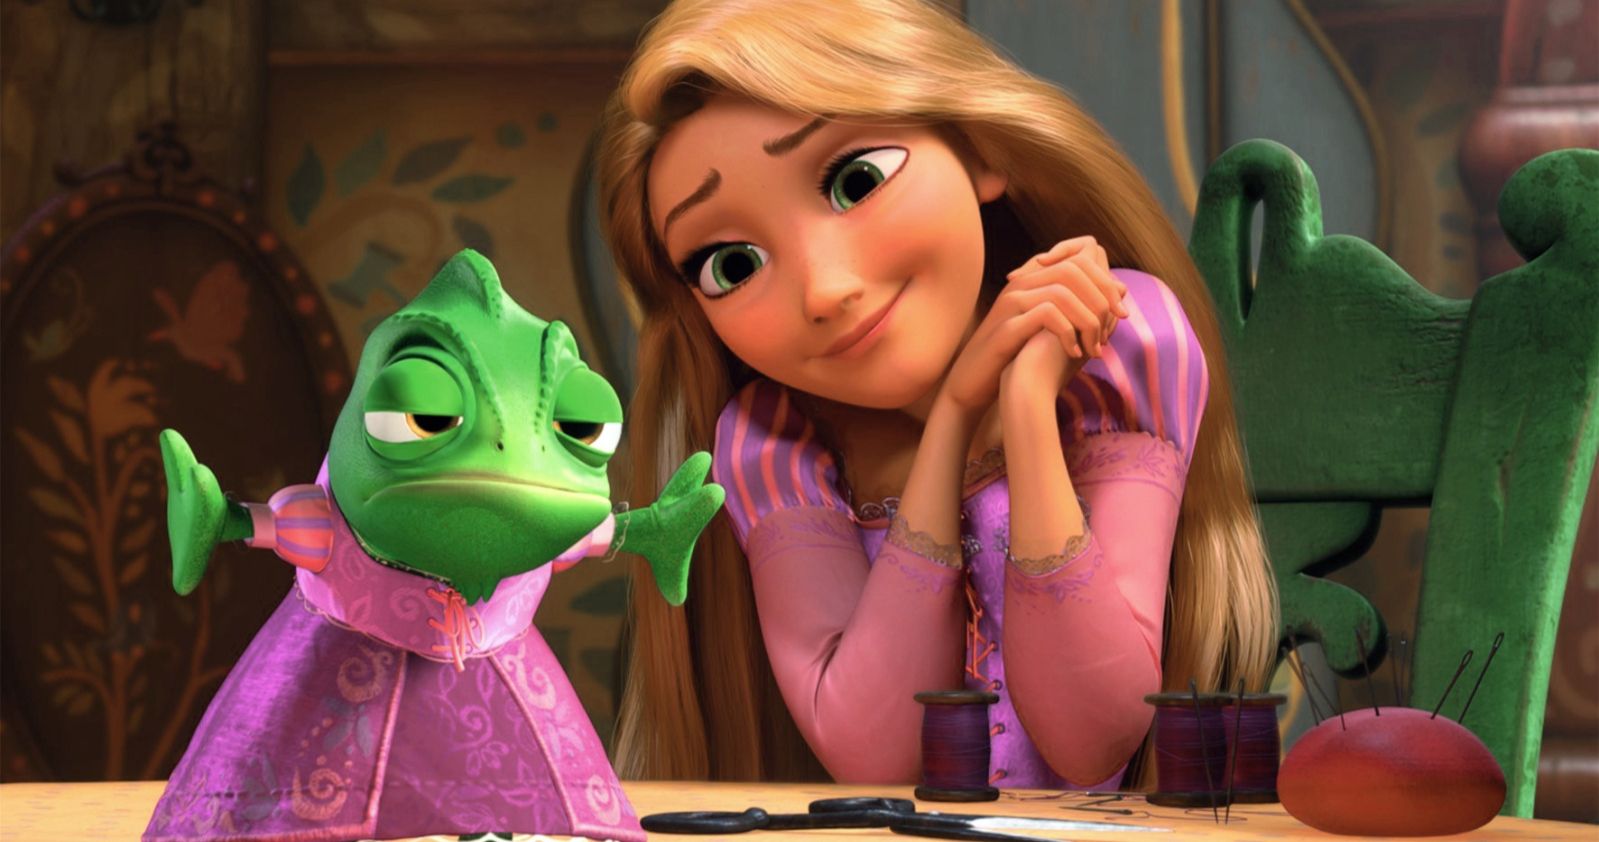 Disney's Tangled and Coronavirus Similarities Have People Freaking Out